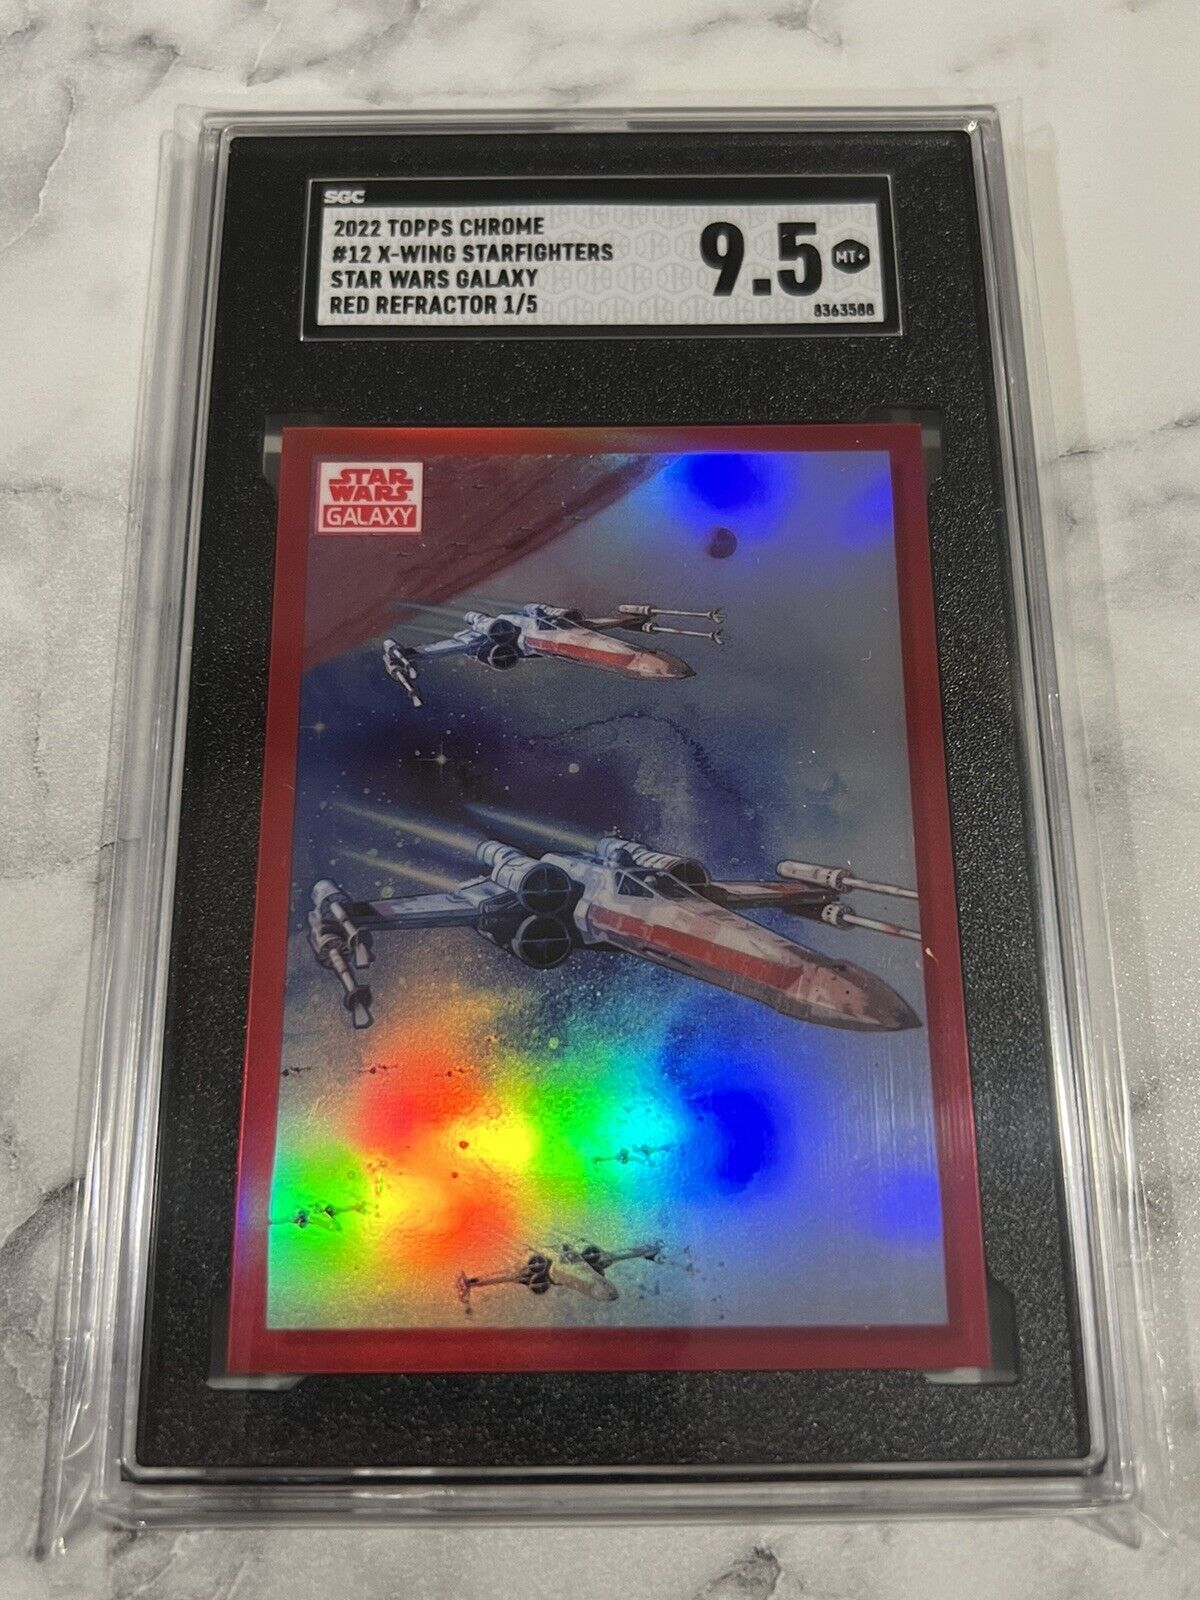 2022 Topps Star Wars Chrome Galaxy X-WIng Starfighters Red Refractor 1/5 SGC 9.5